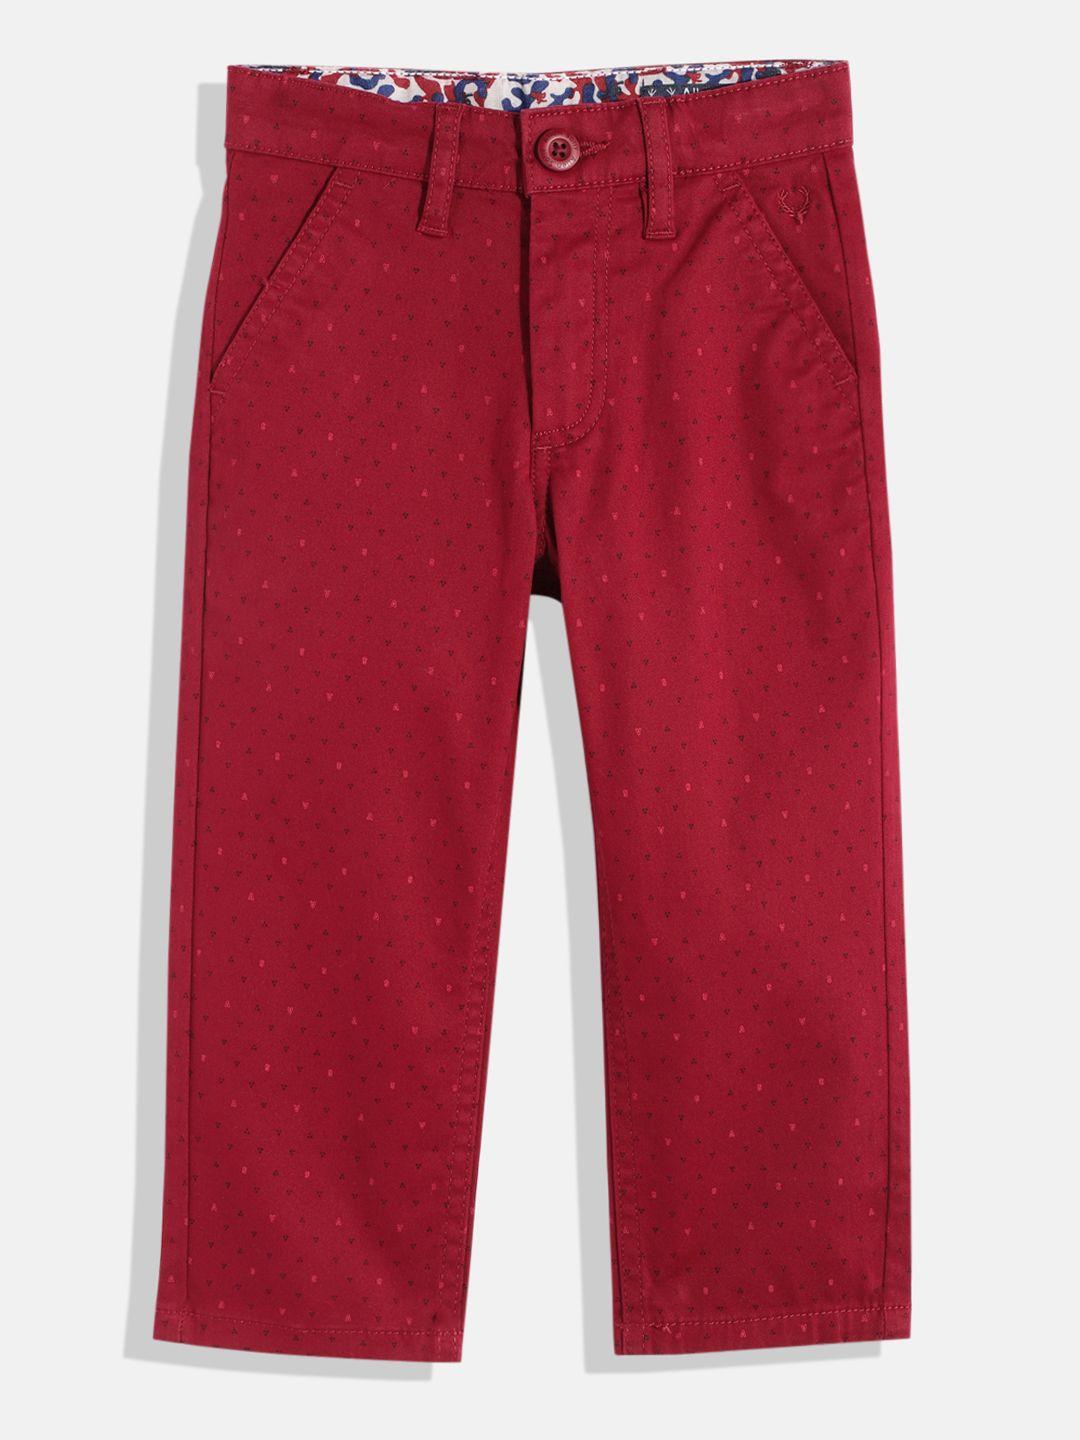 allen-solly-junior-boys-red-printed-chinos-trousers